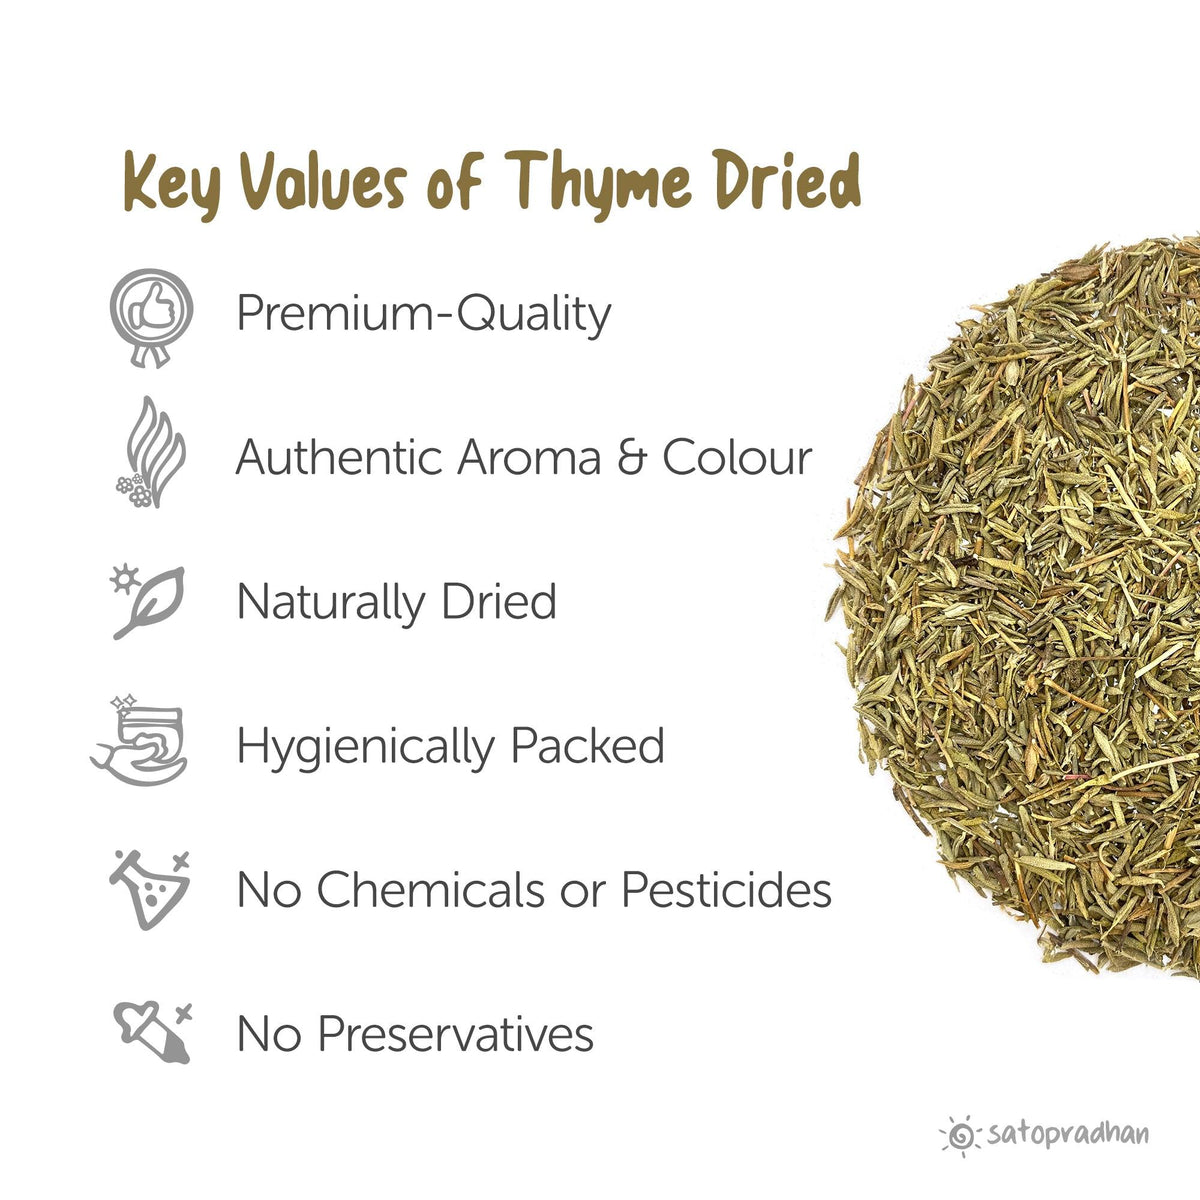 Thyme Flakes Dried 50g - Purely Natural & Organic herb without Adulteration - No Added Preservatives